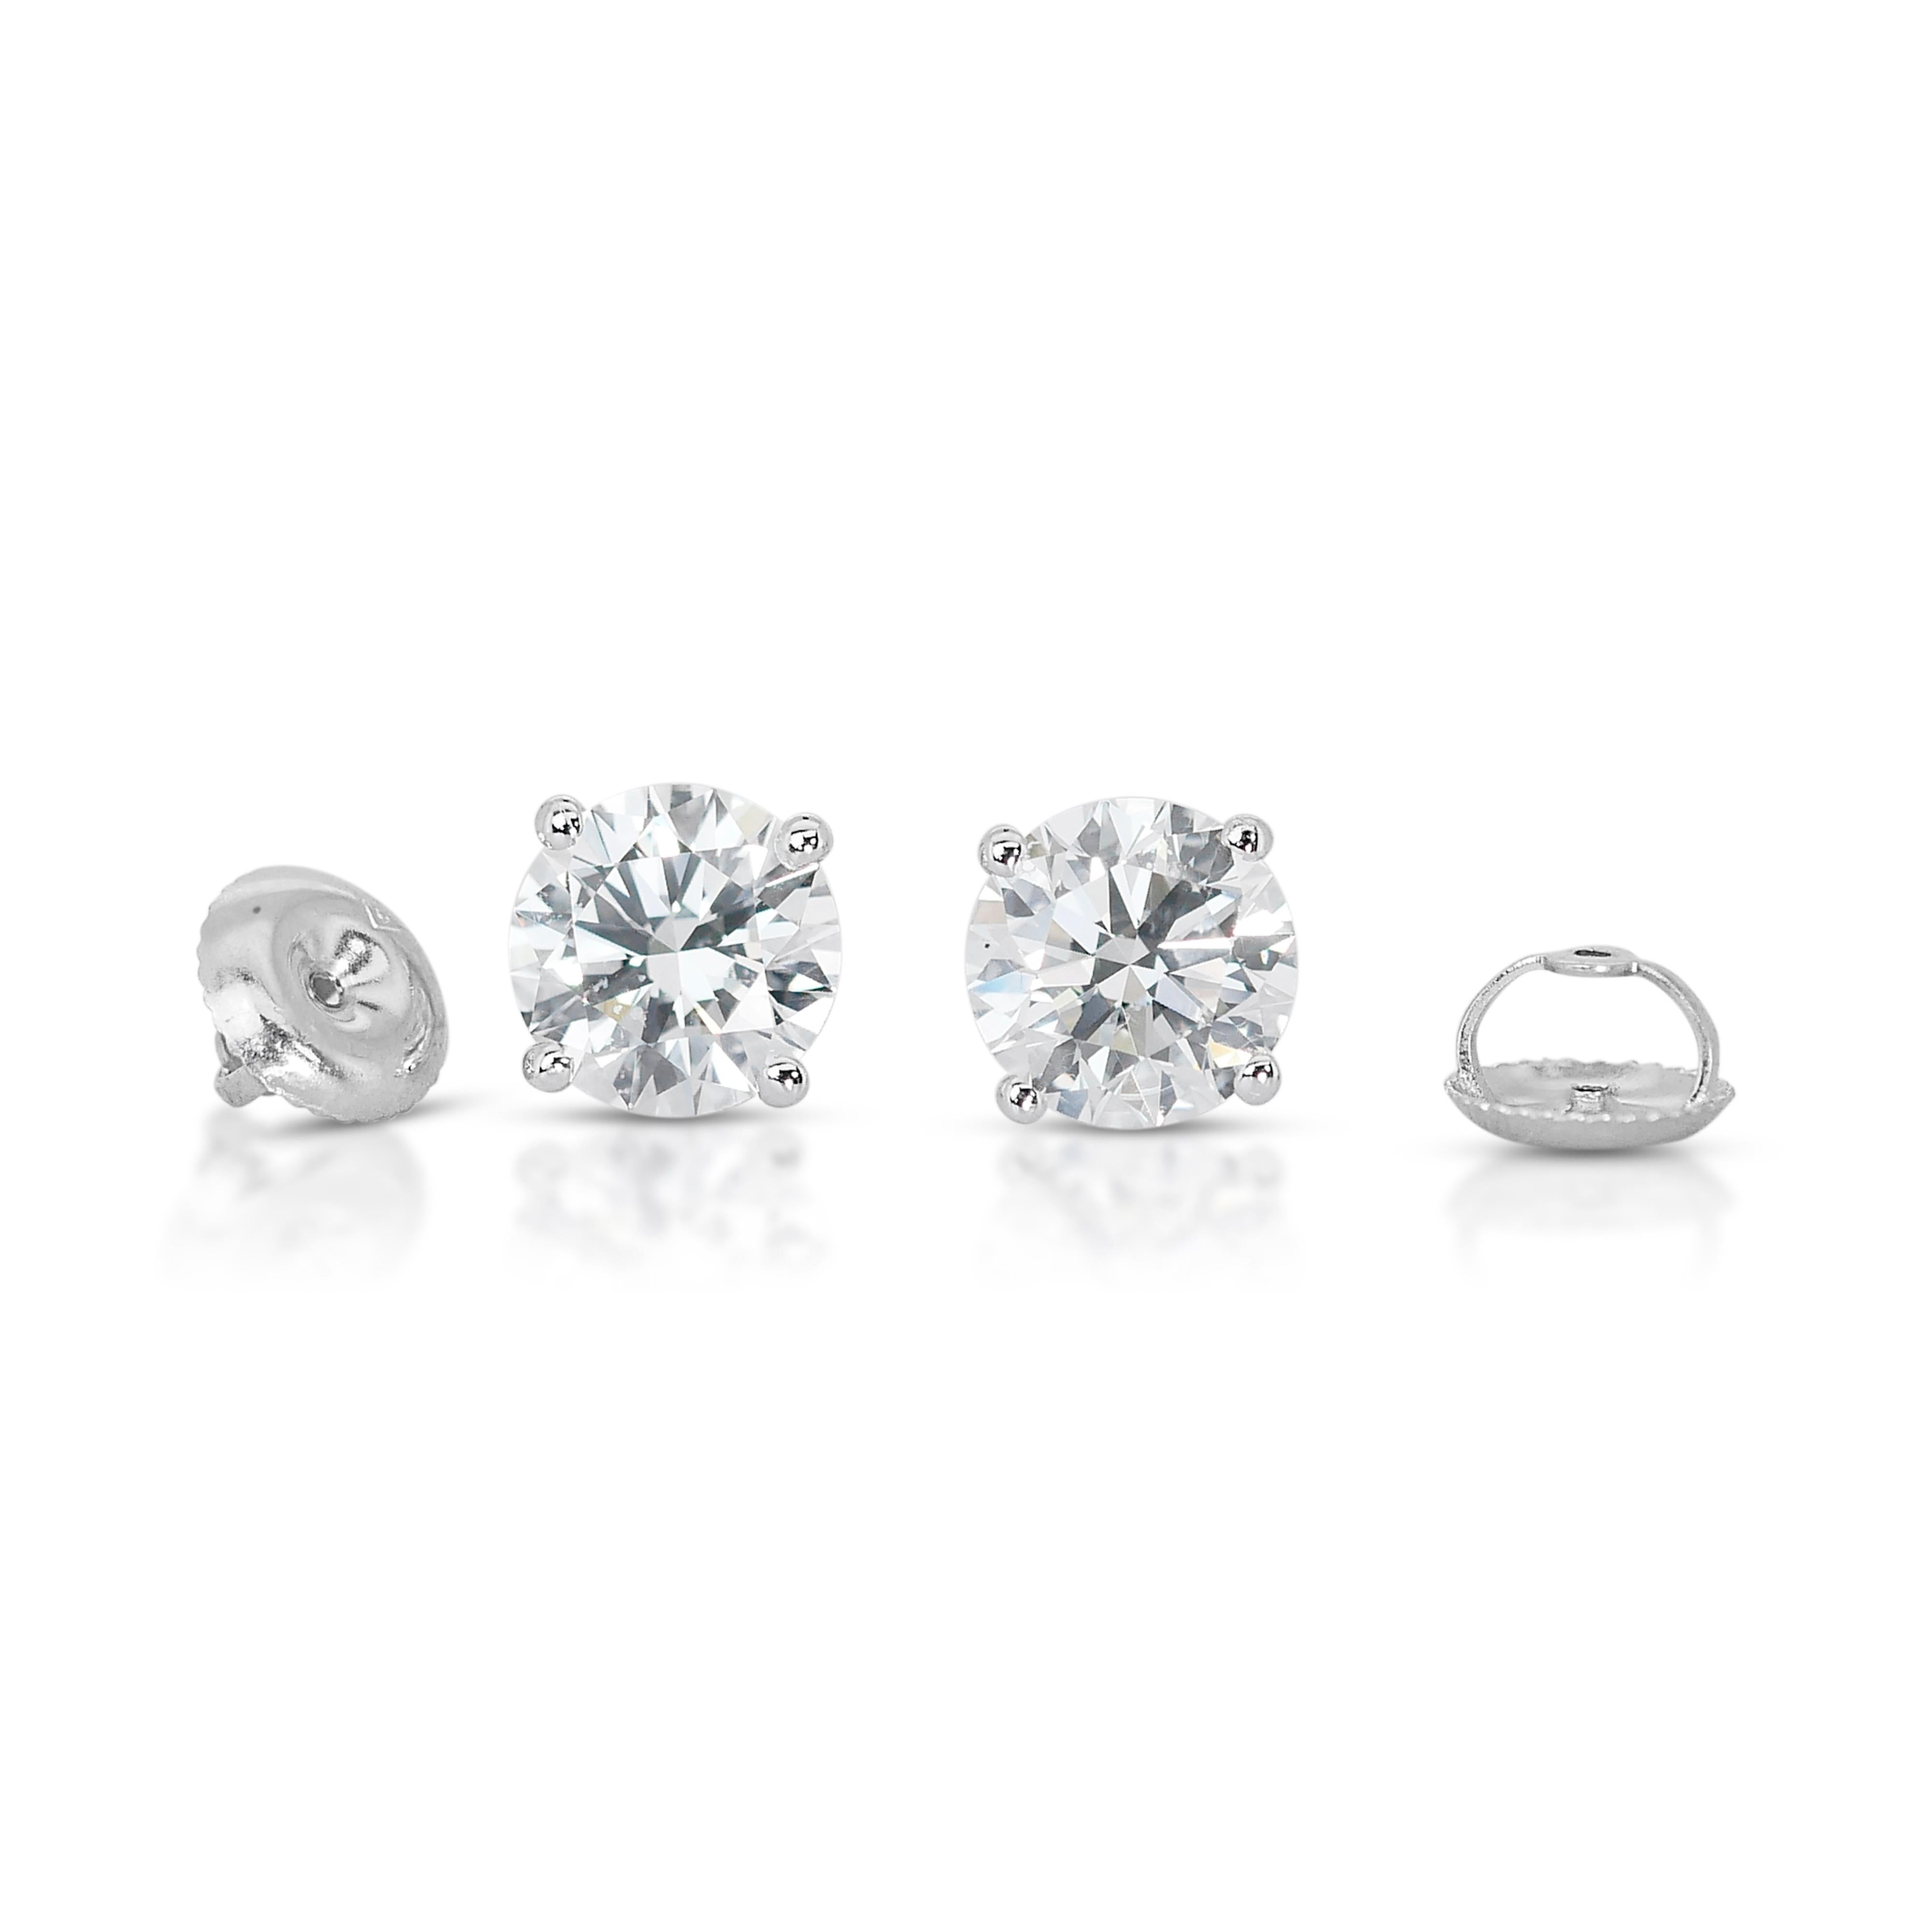 Gleaming 18k White Gold Natural Diamond Stud Earrings w/3.10 ct - GIA Certified For Sale 2